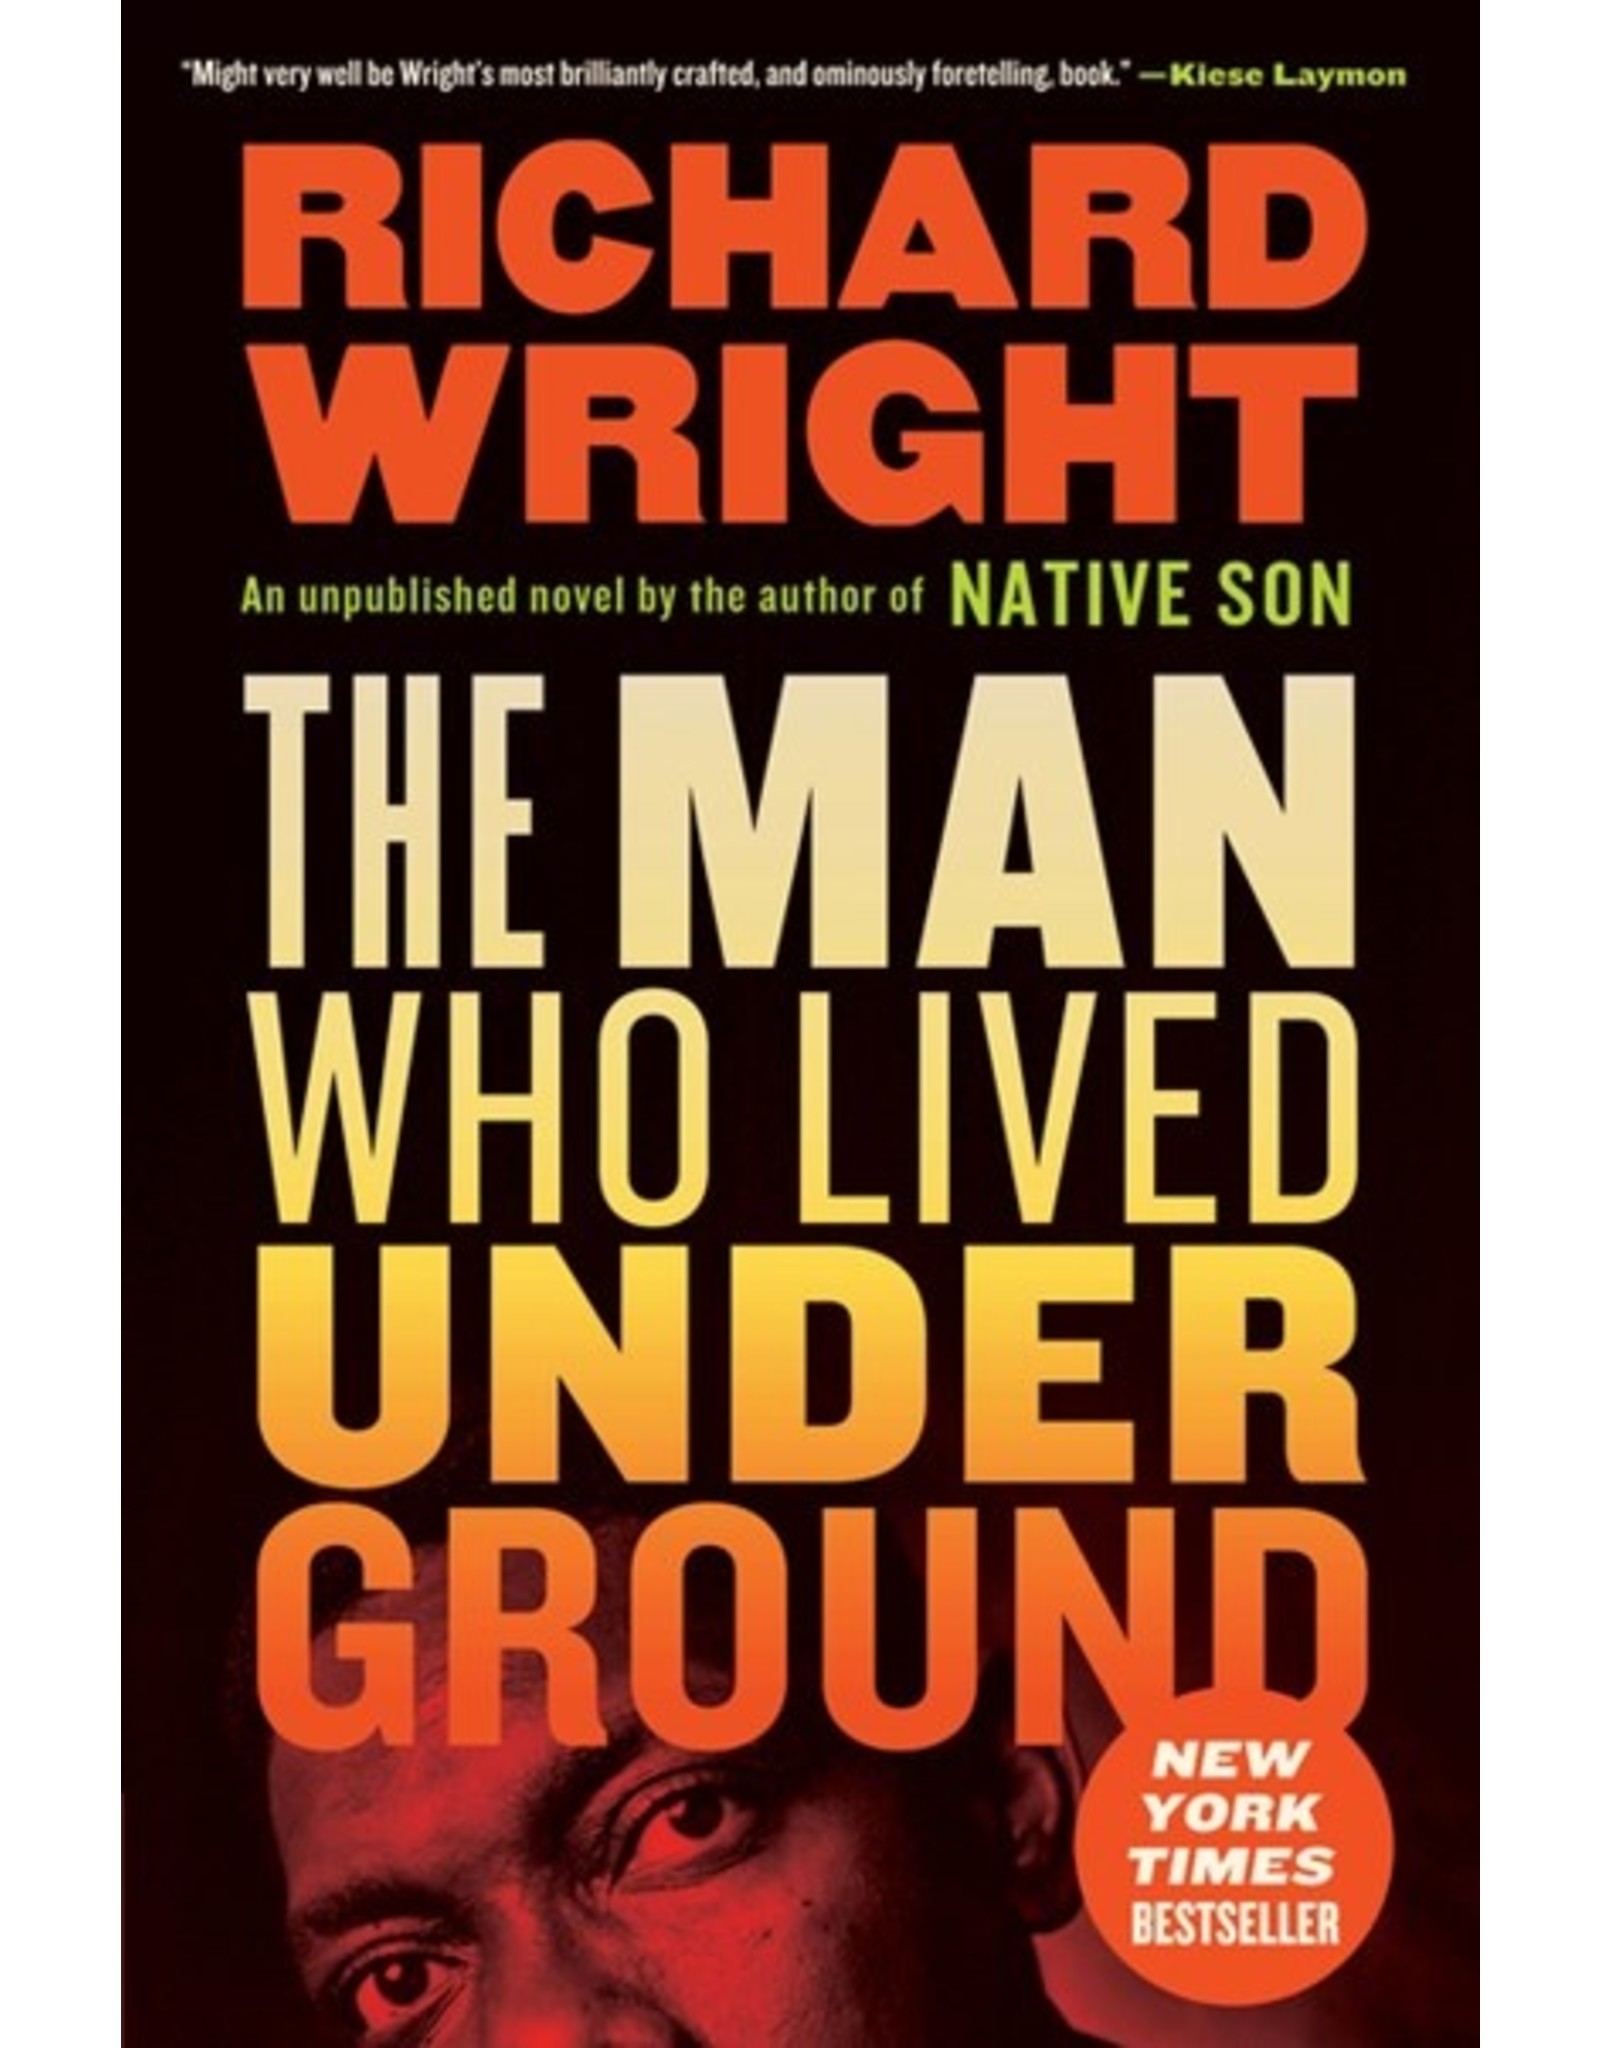 Books The Man Who Lived Underground by Richard Wright